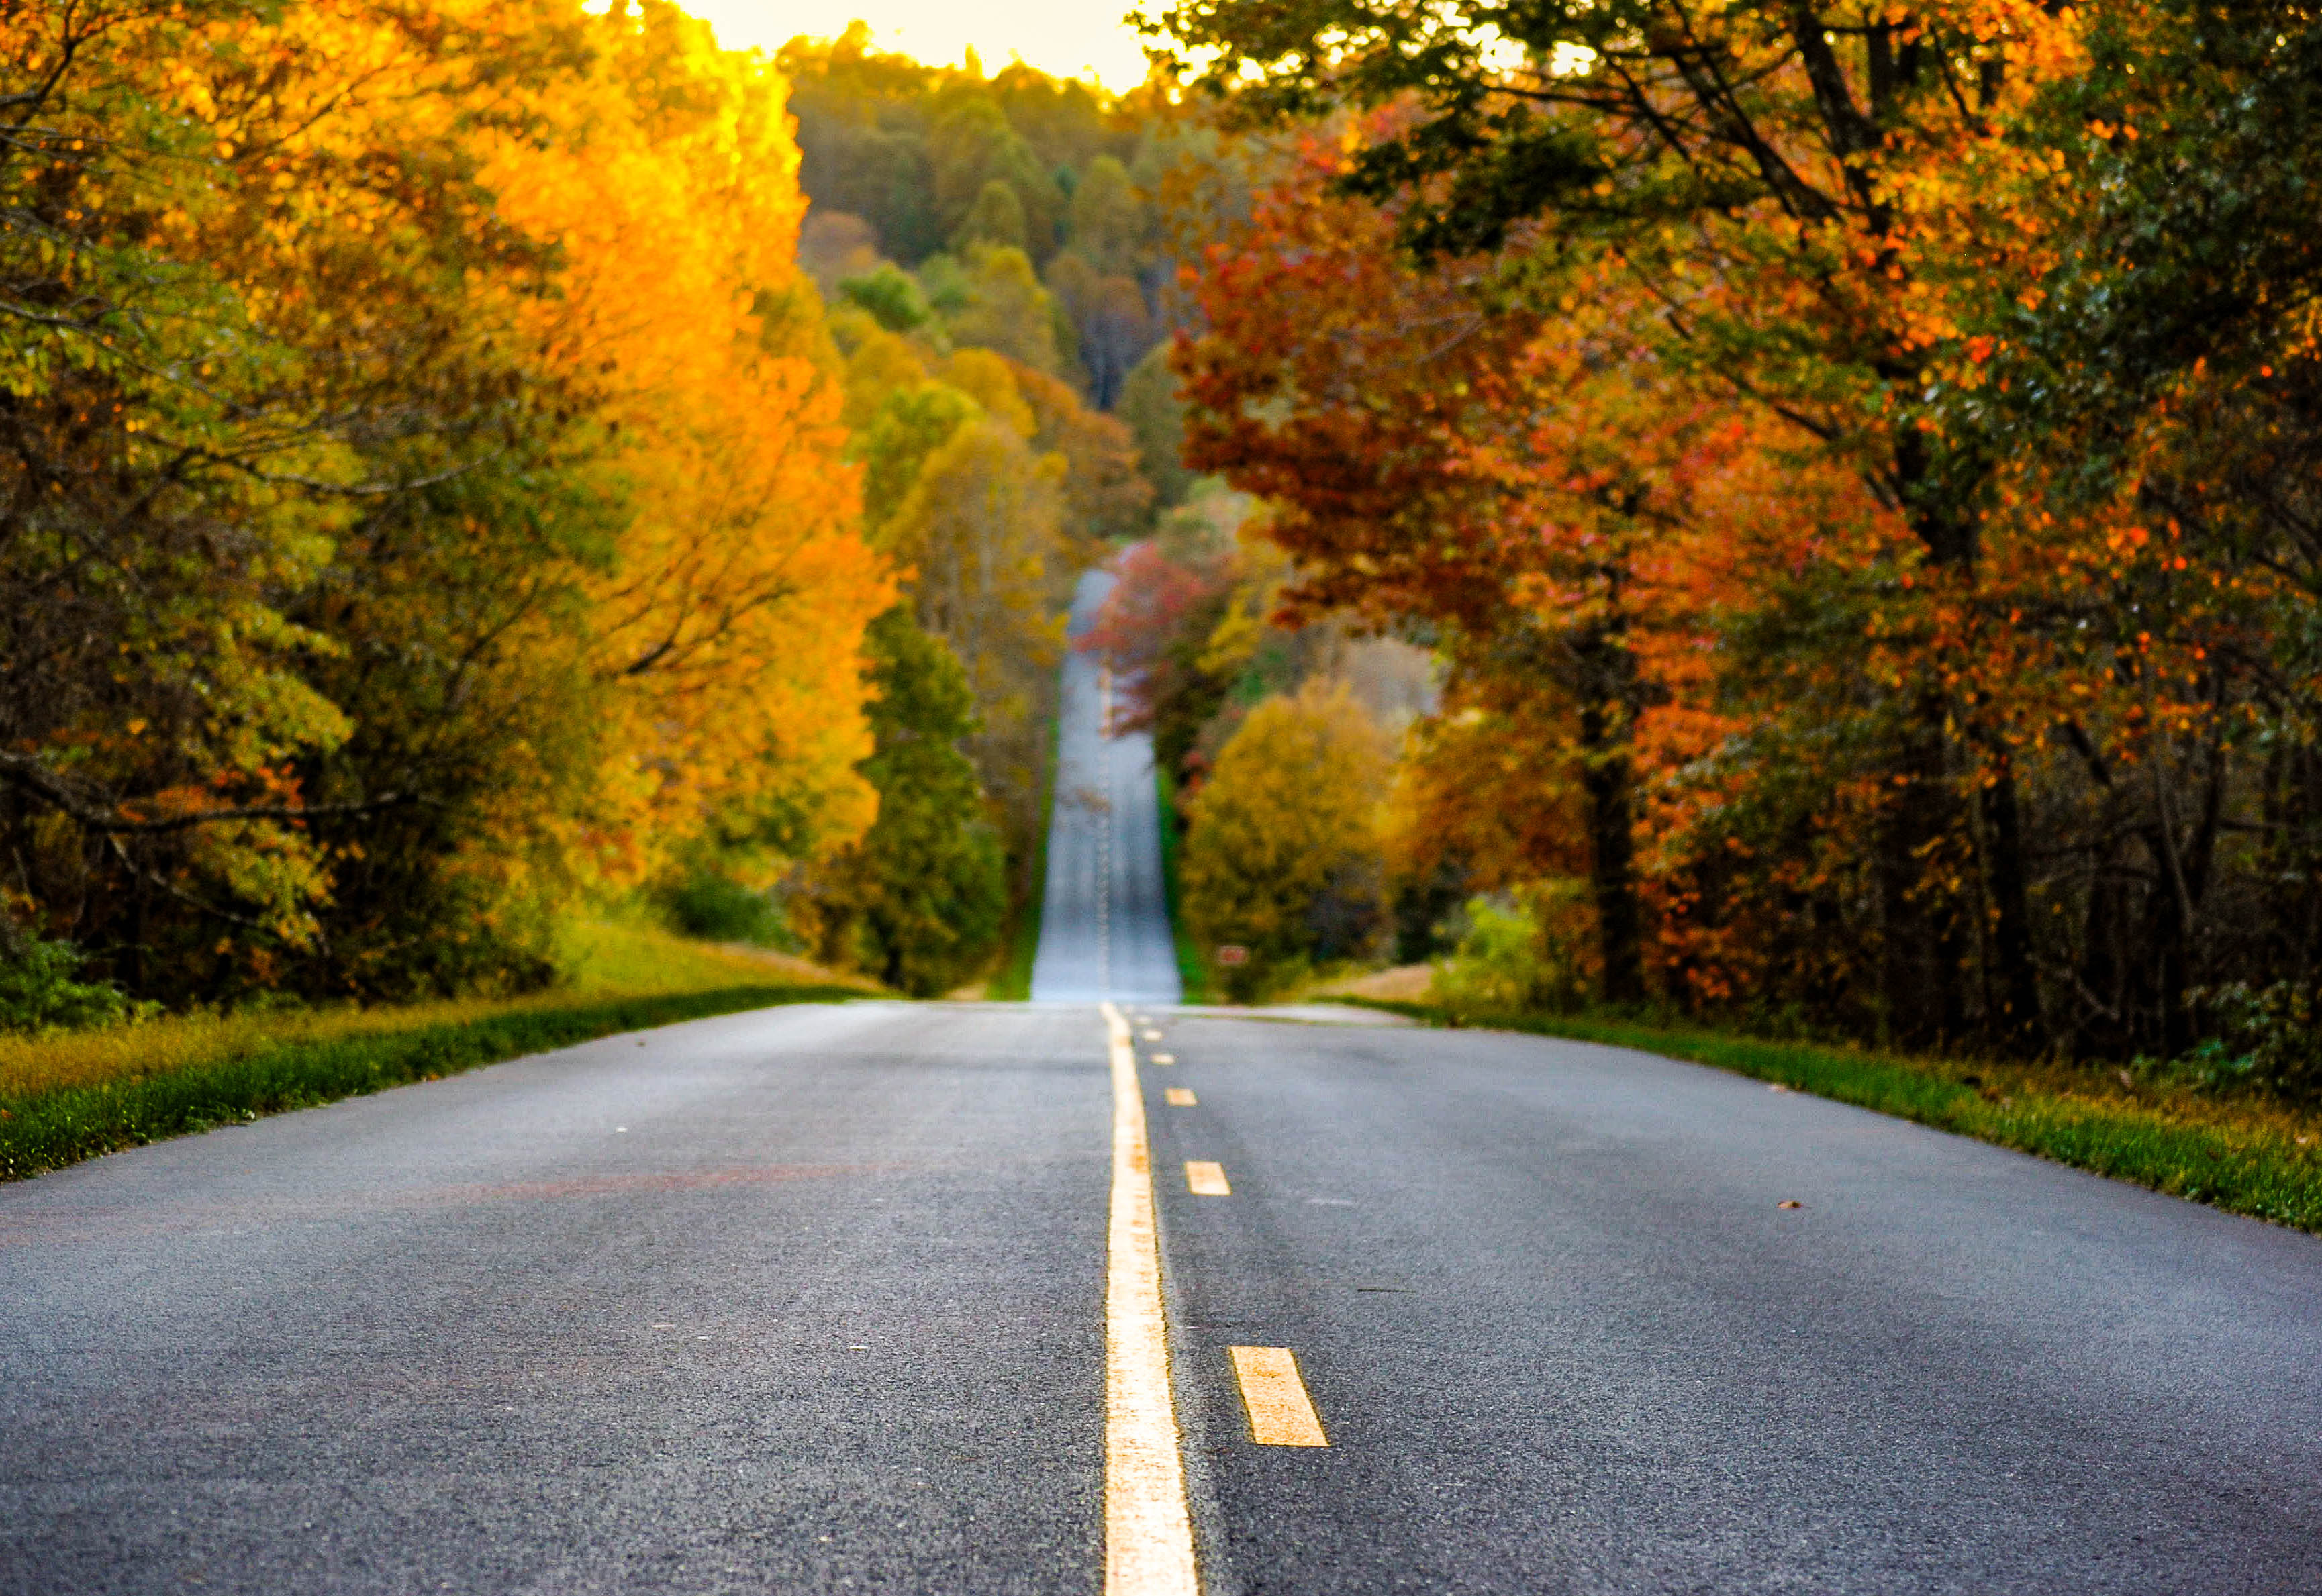 Drive the Blue Ridge Parkway this Fall 3Day Itinerary for America's